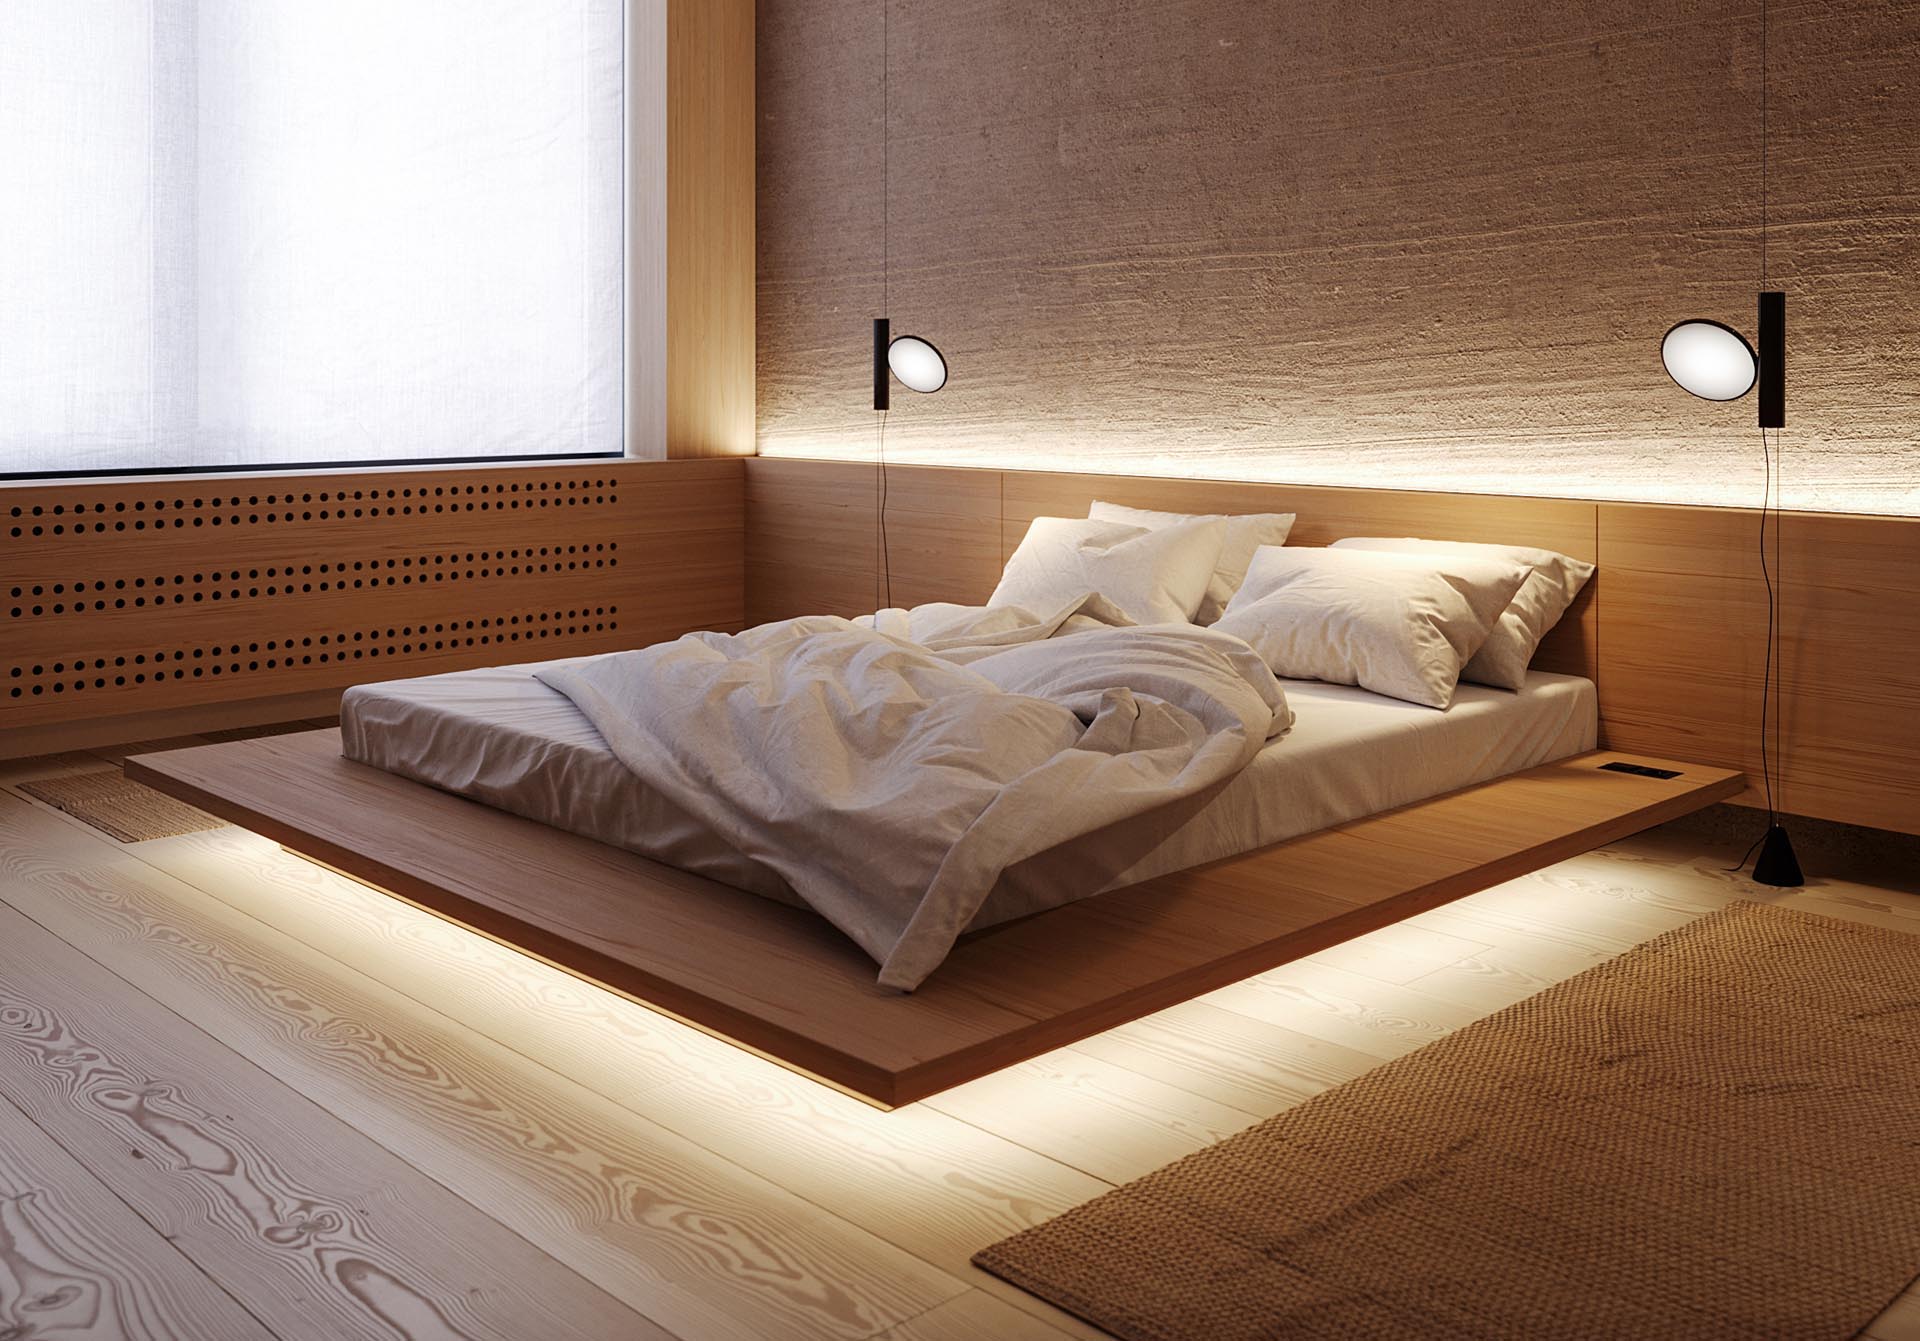 Led Lighting Allows This Bed To Appear, Queen Size Wooden Headboard With Lights